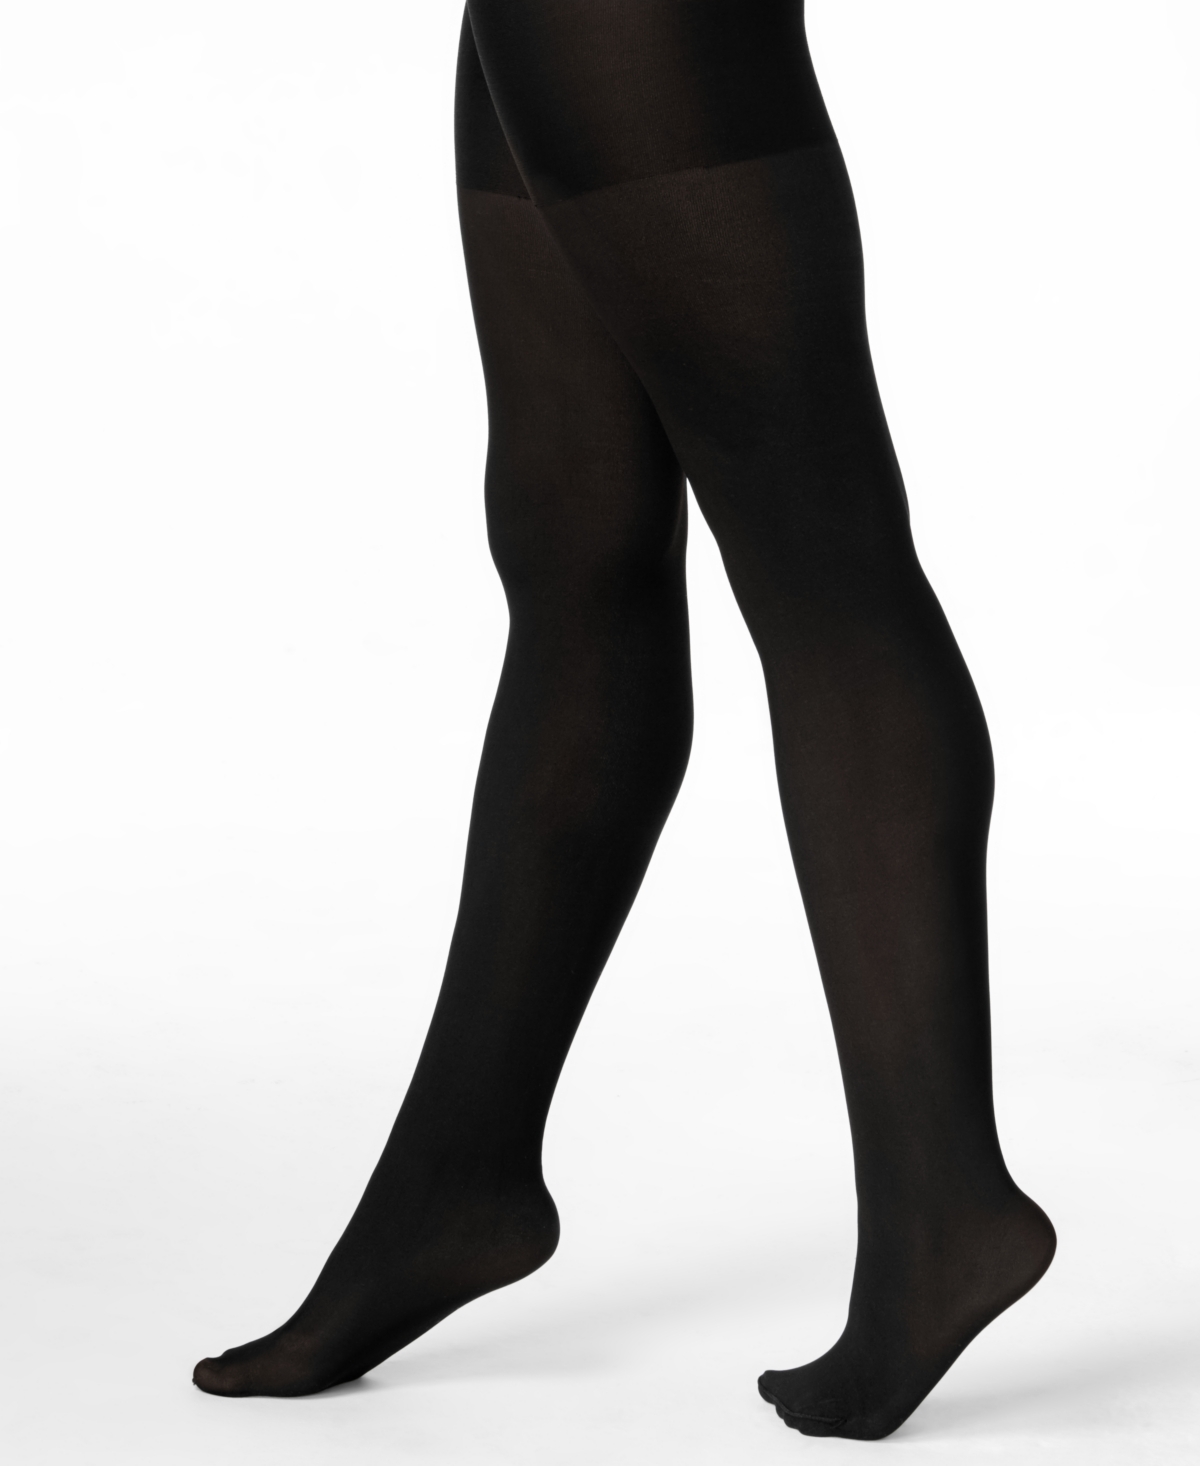 Spanx Luxe Leg High Waisted Sheer Tights In Black